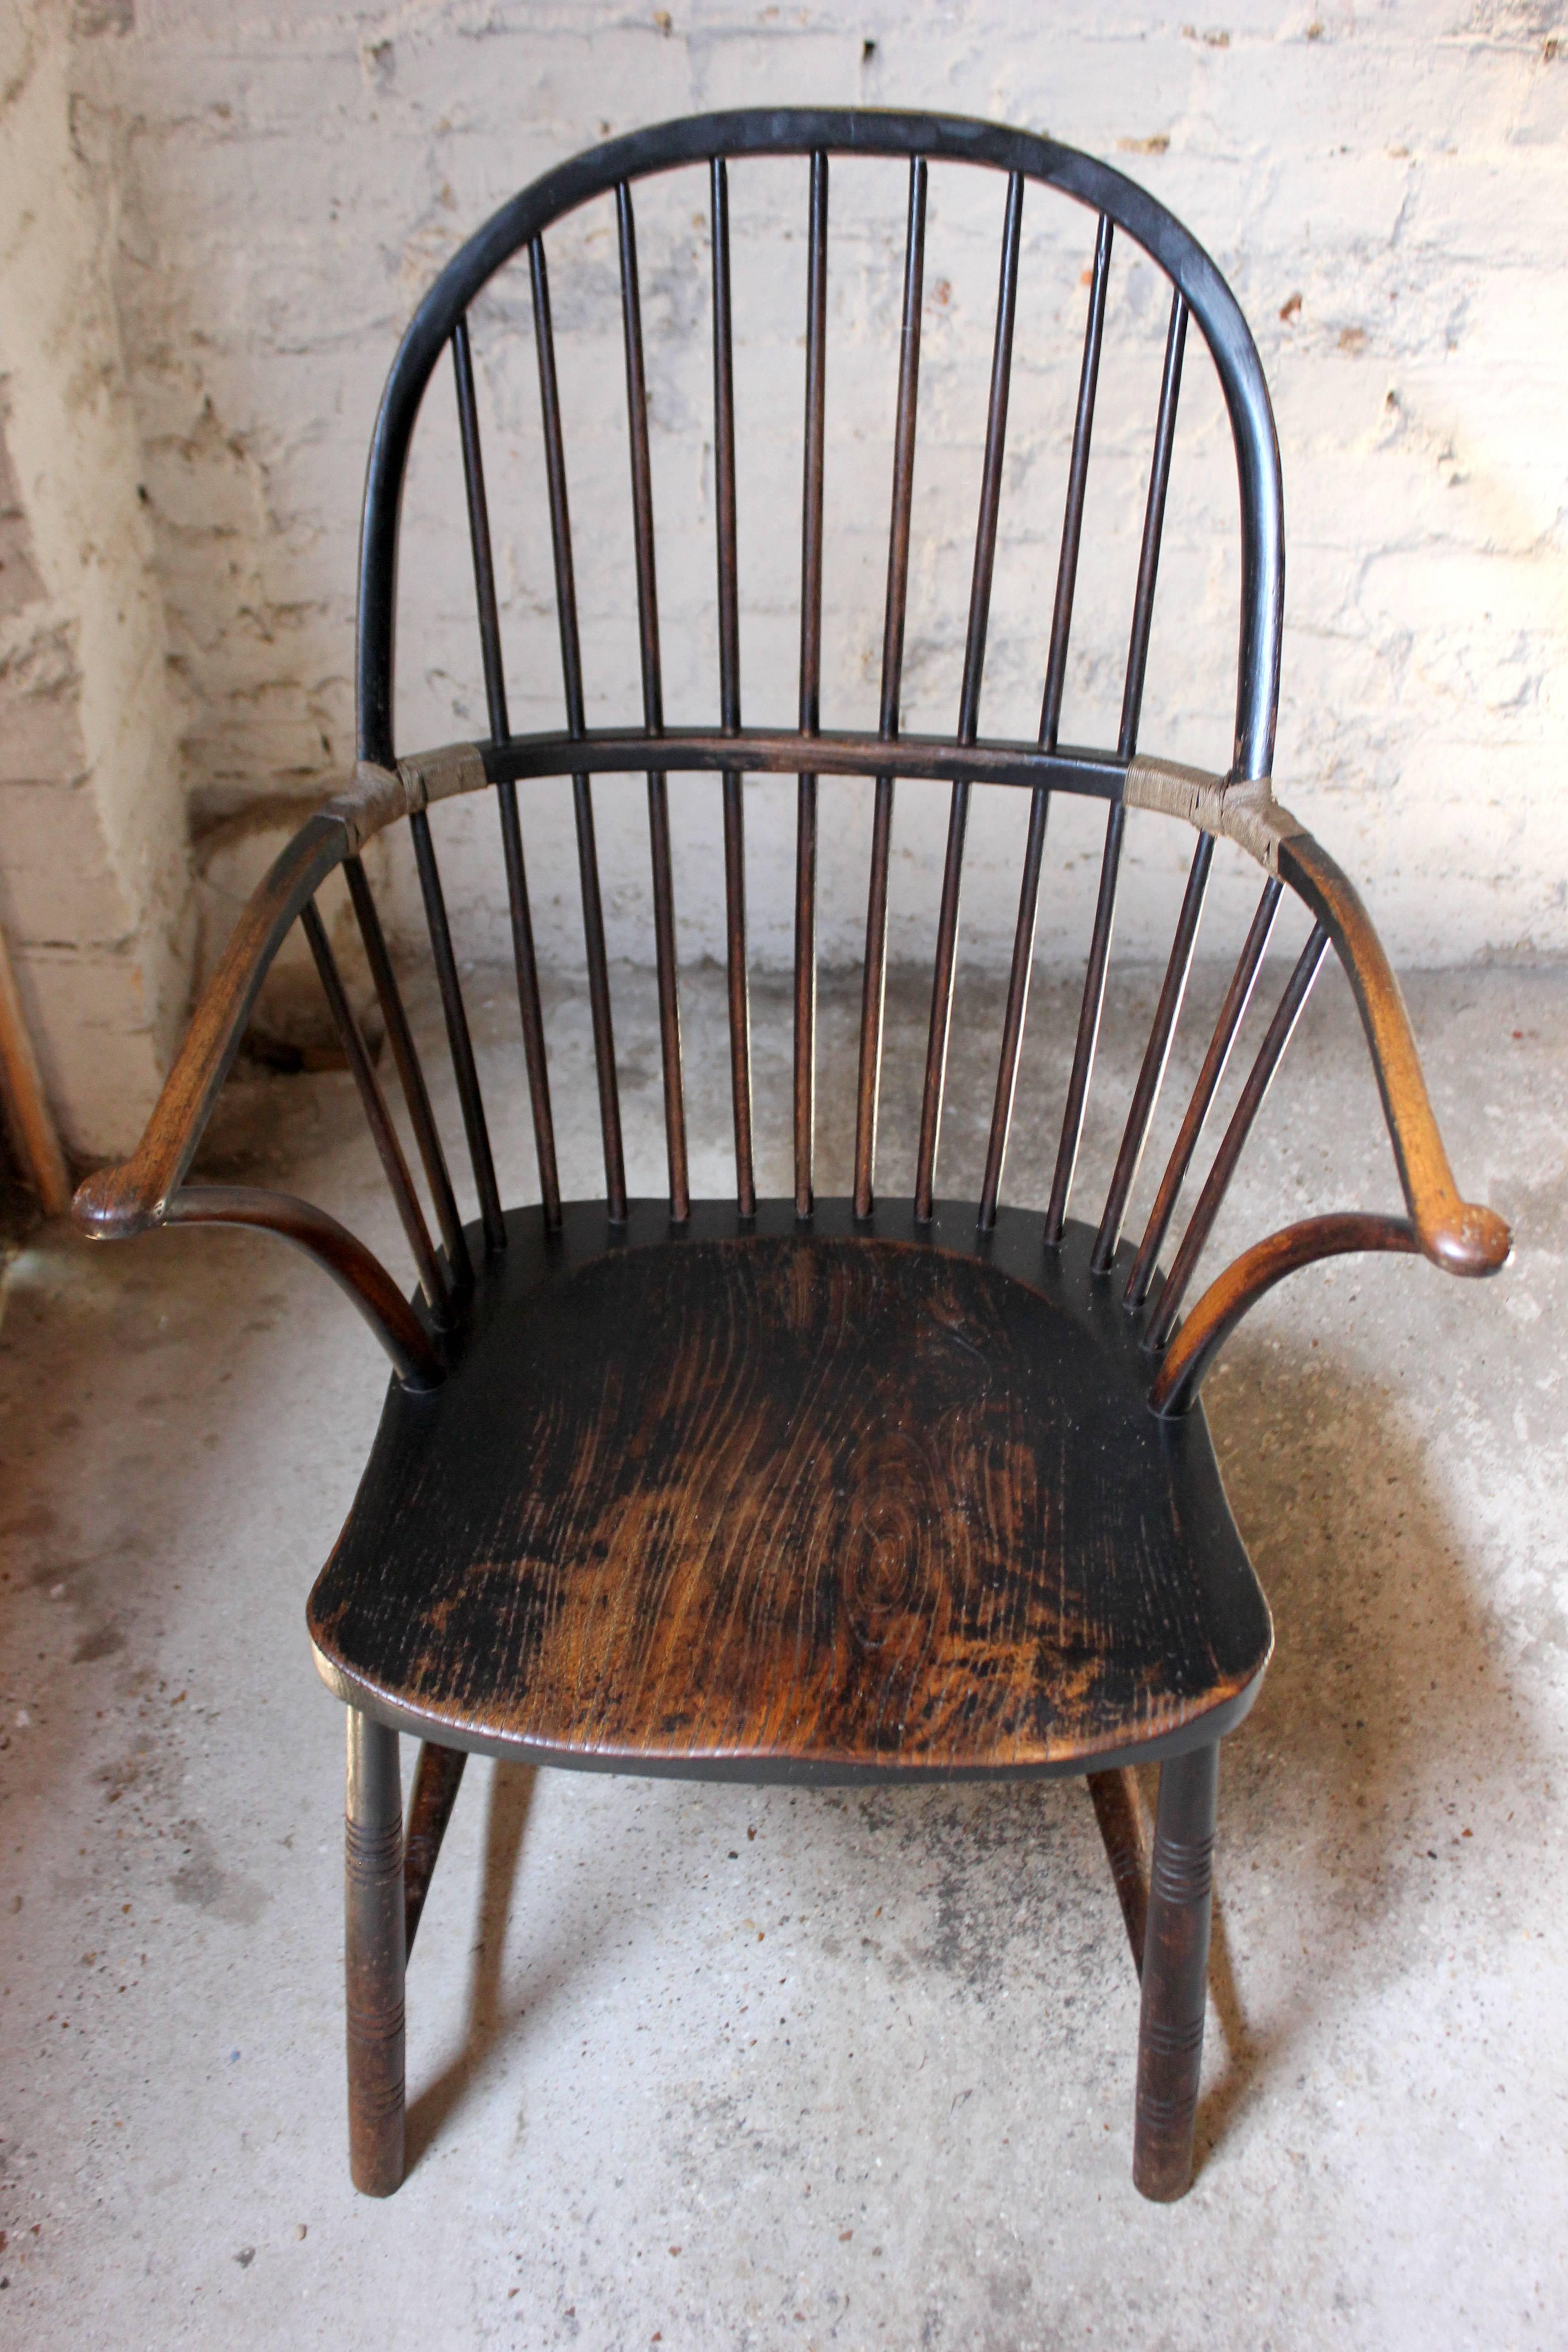 Hand-Painted Very Good Black Painted English Bow-Back Windsor Armchair, circa 1820-1830